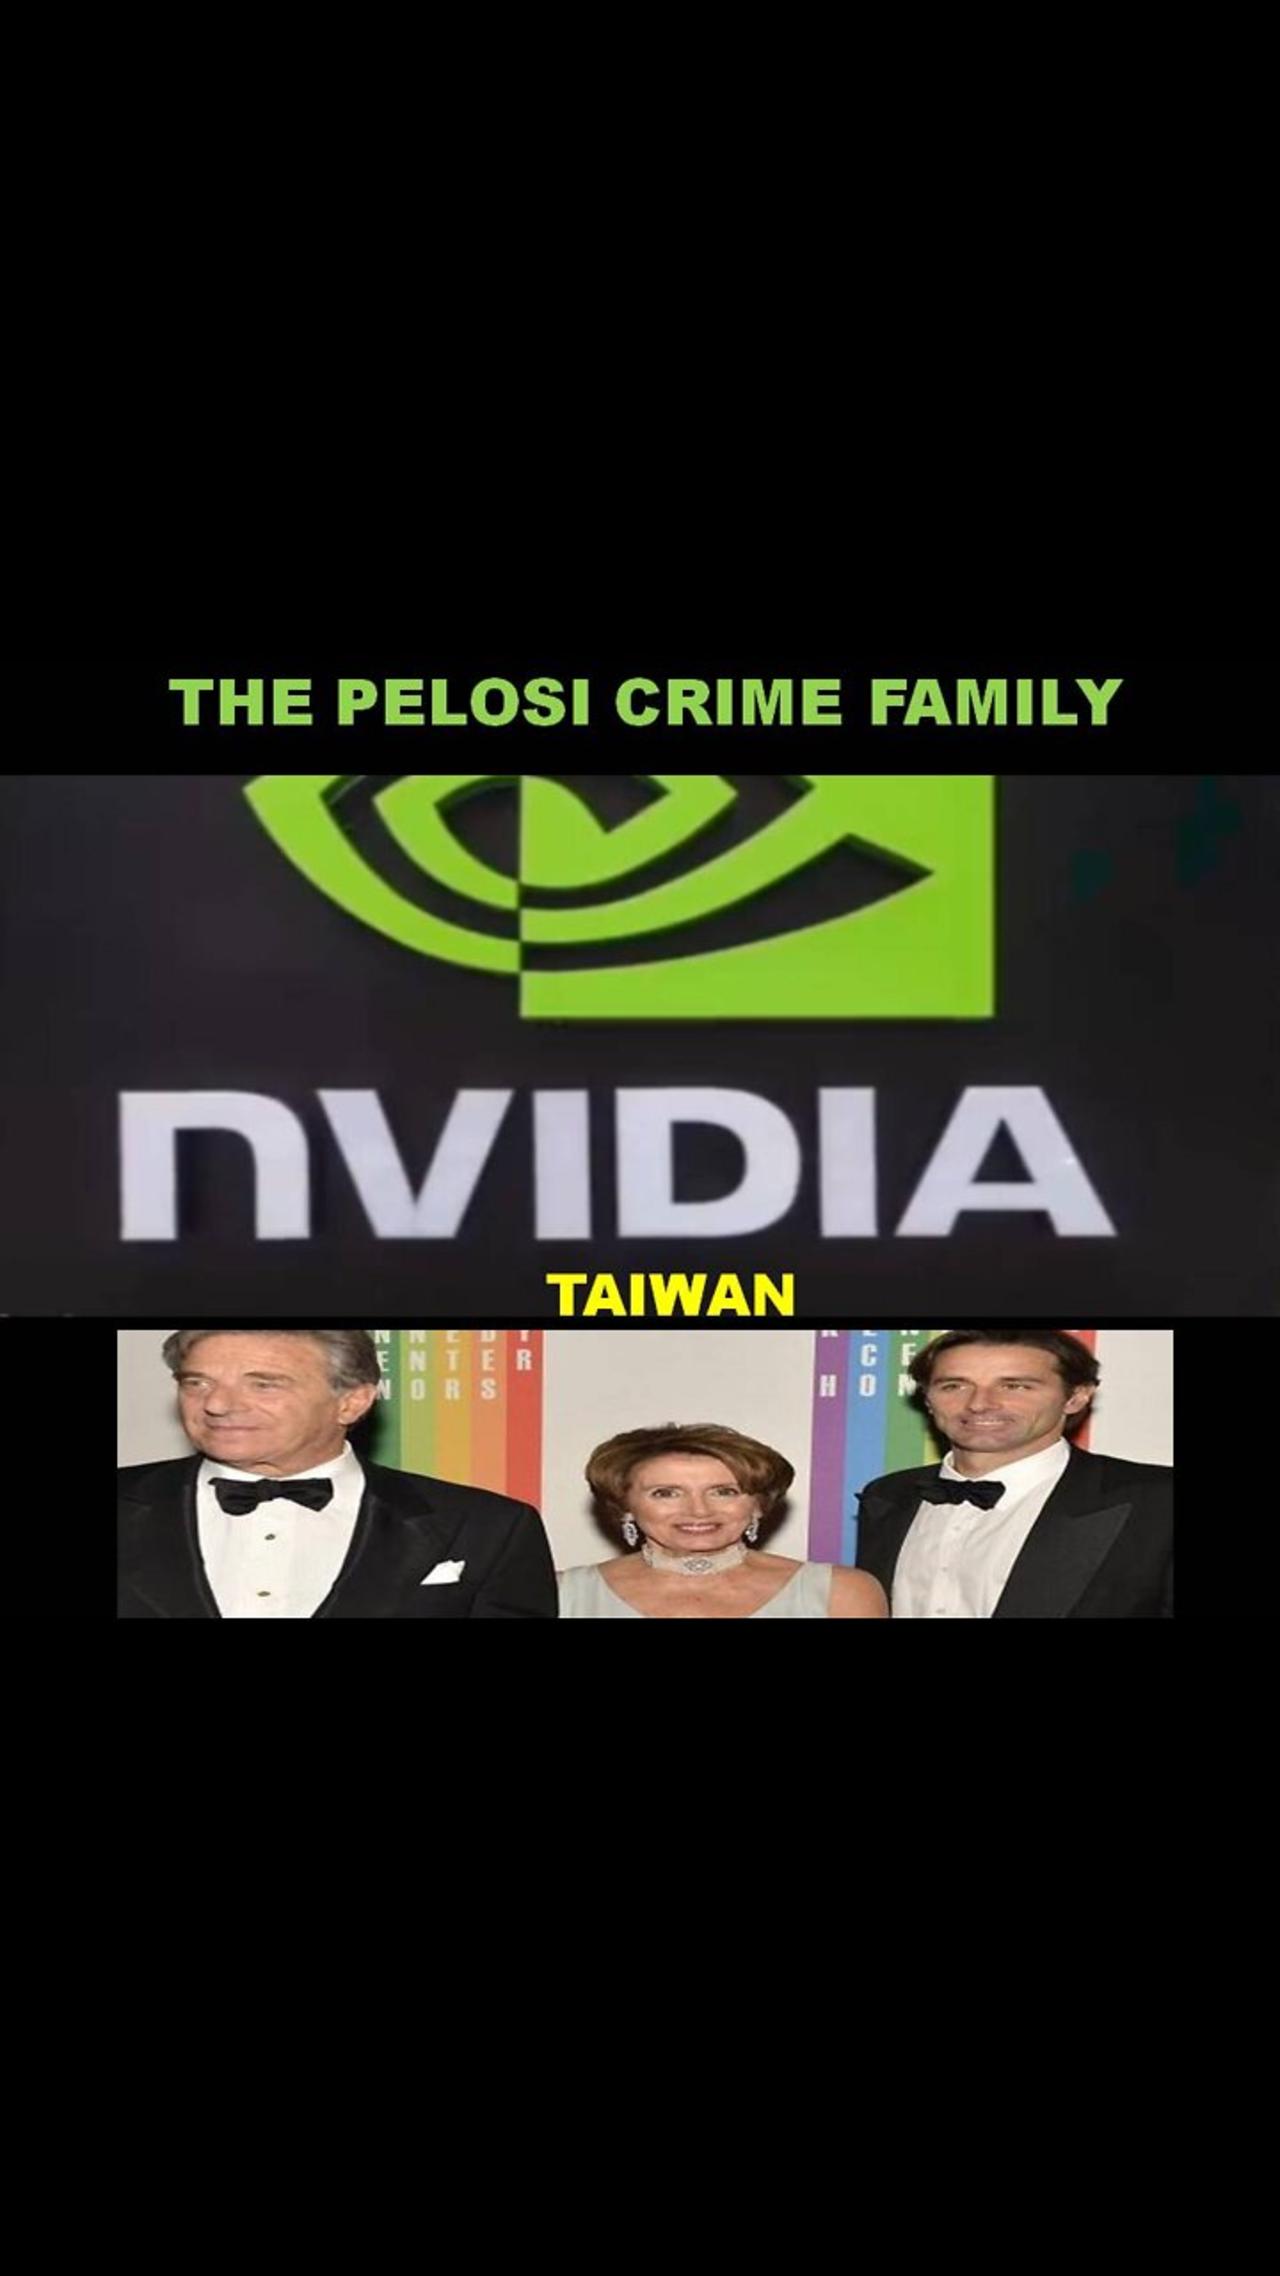 THE PELOSI CRIME FAMILY AND CHINA CONNECTIONS